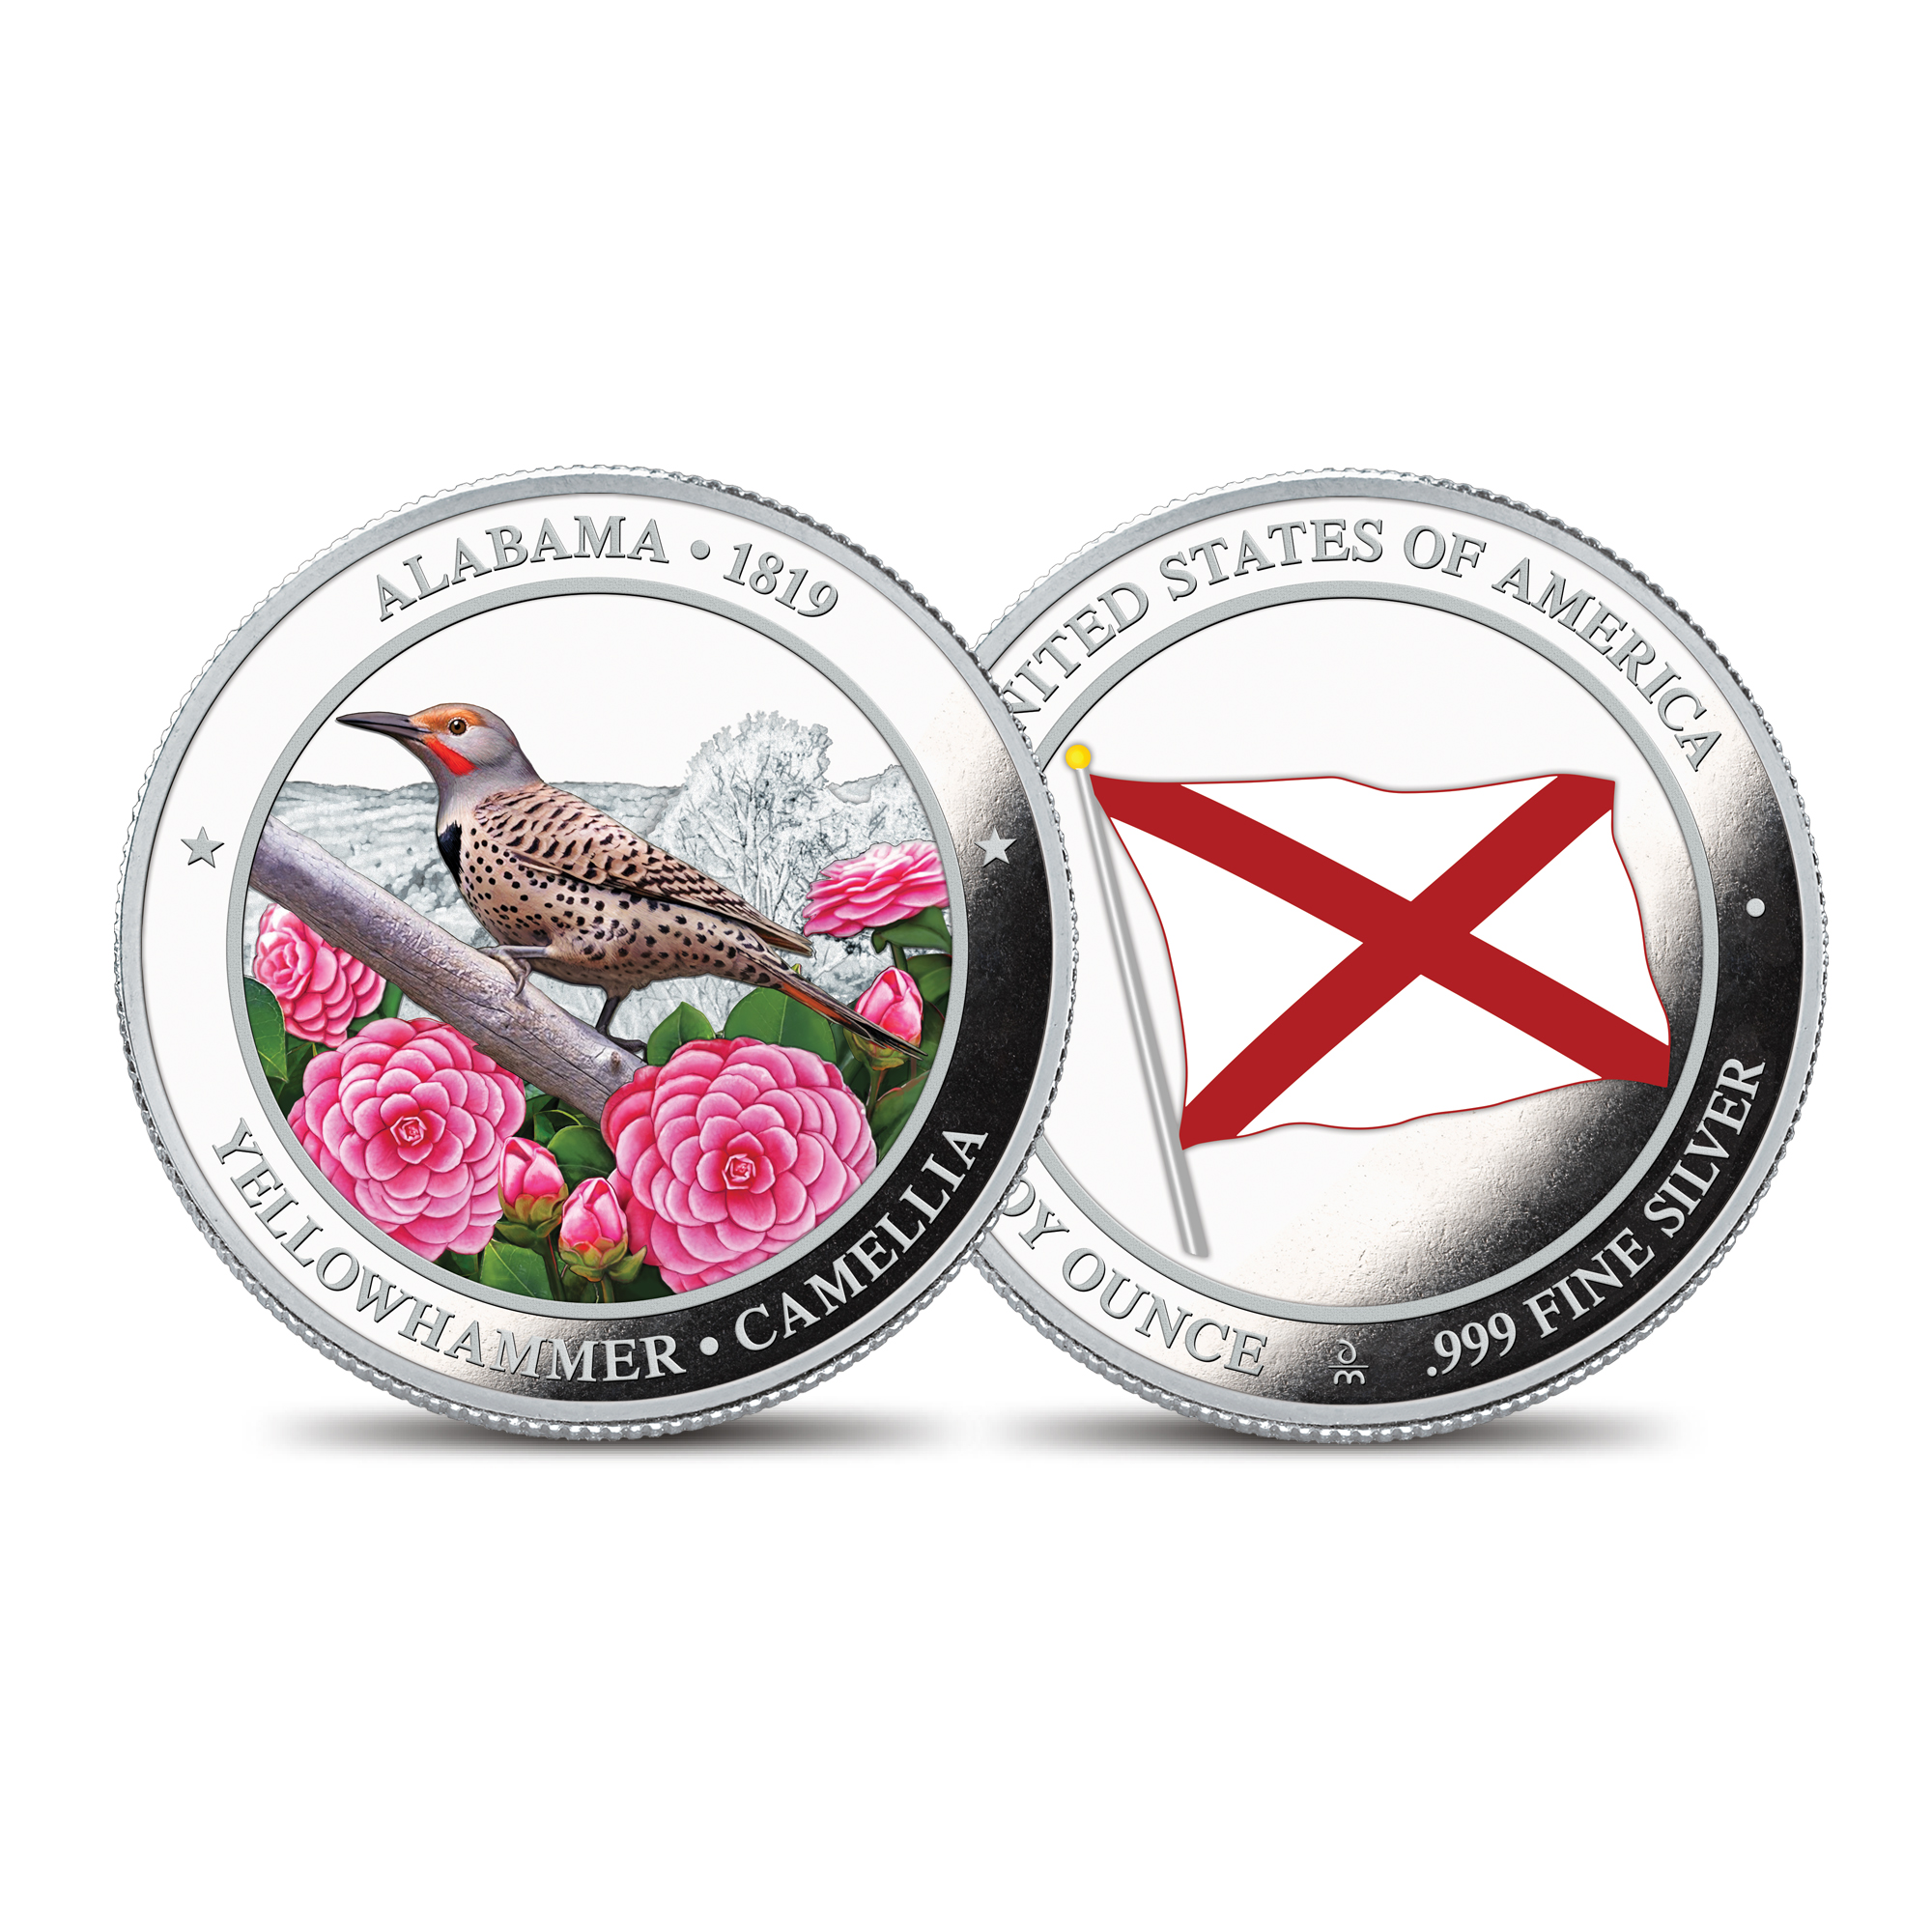 The State Bird and Flower Silver Commemoratives 2167 0088 a commemorativeAK